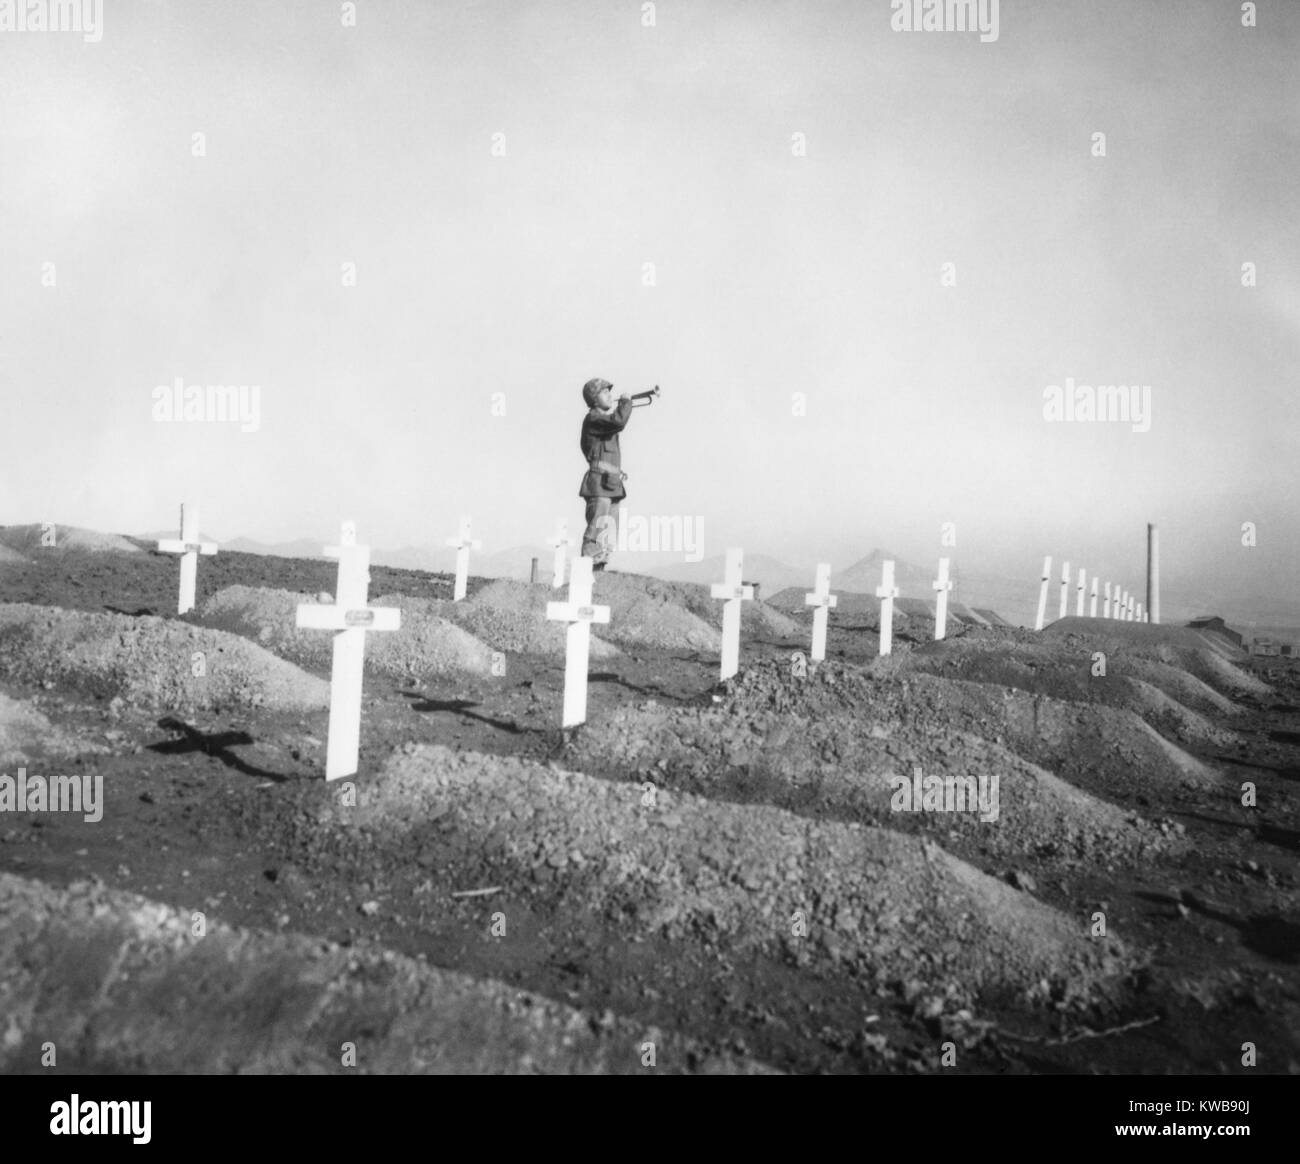 U.S. Marine plays 'Taps' over the graves of fallen Leathernecks during memorial services. The First Marine Division dead were brought from Chosin Reservoir to be buried in the cemetery at Hungnam, Korea. Dec. 13, 1950. Korean War, 1950-53. (BSLOC 2014 11 207) Stock Photo